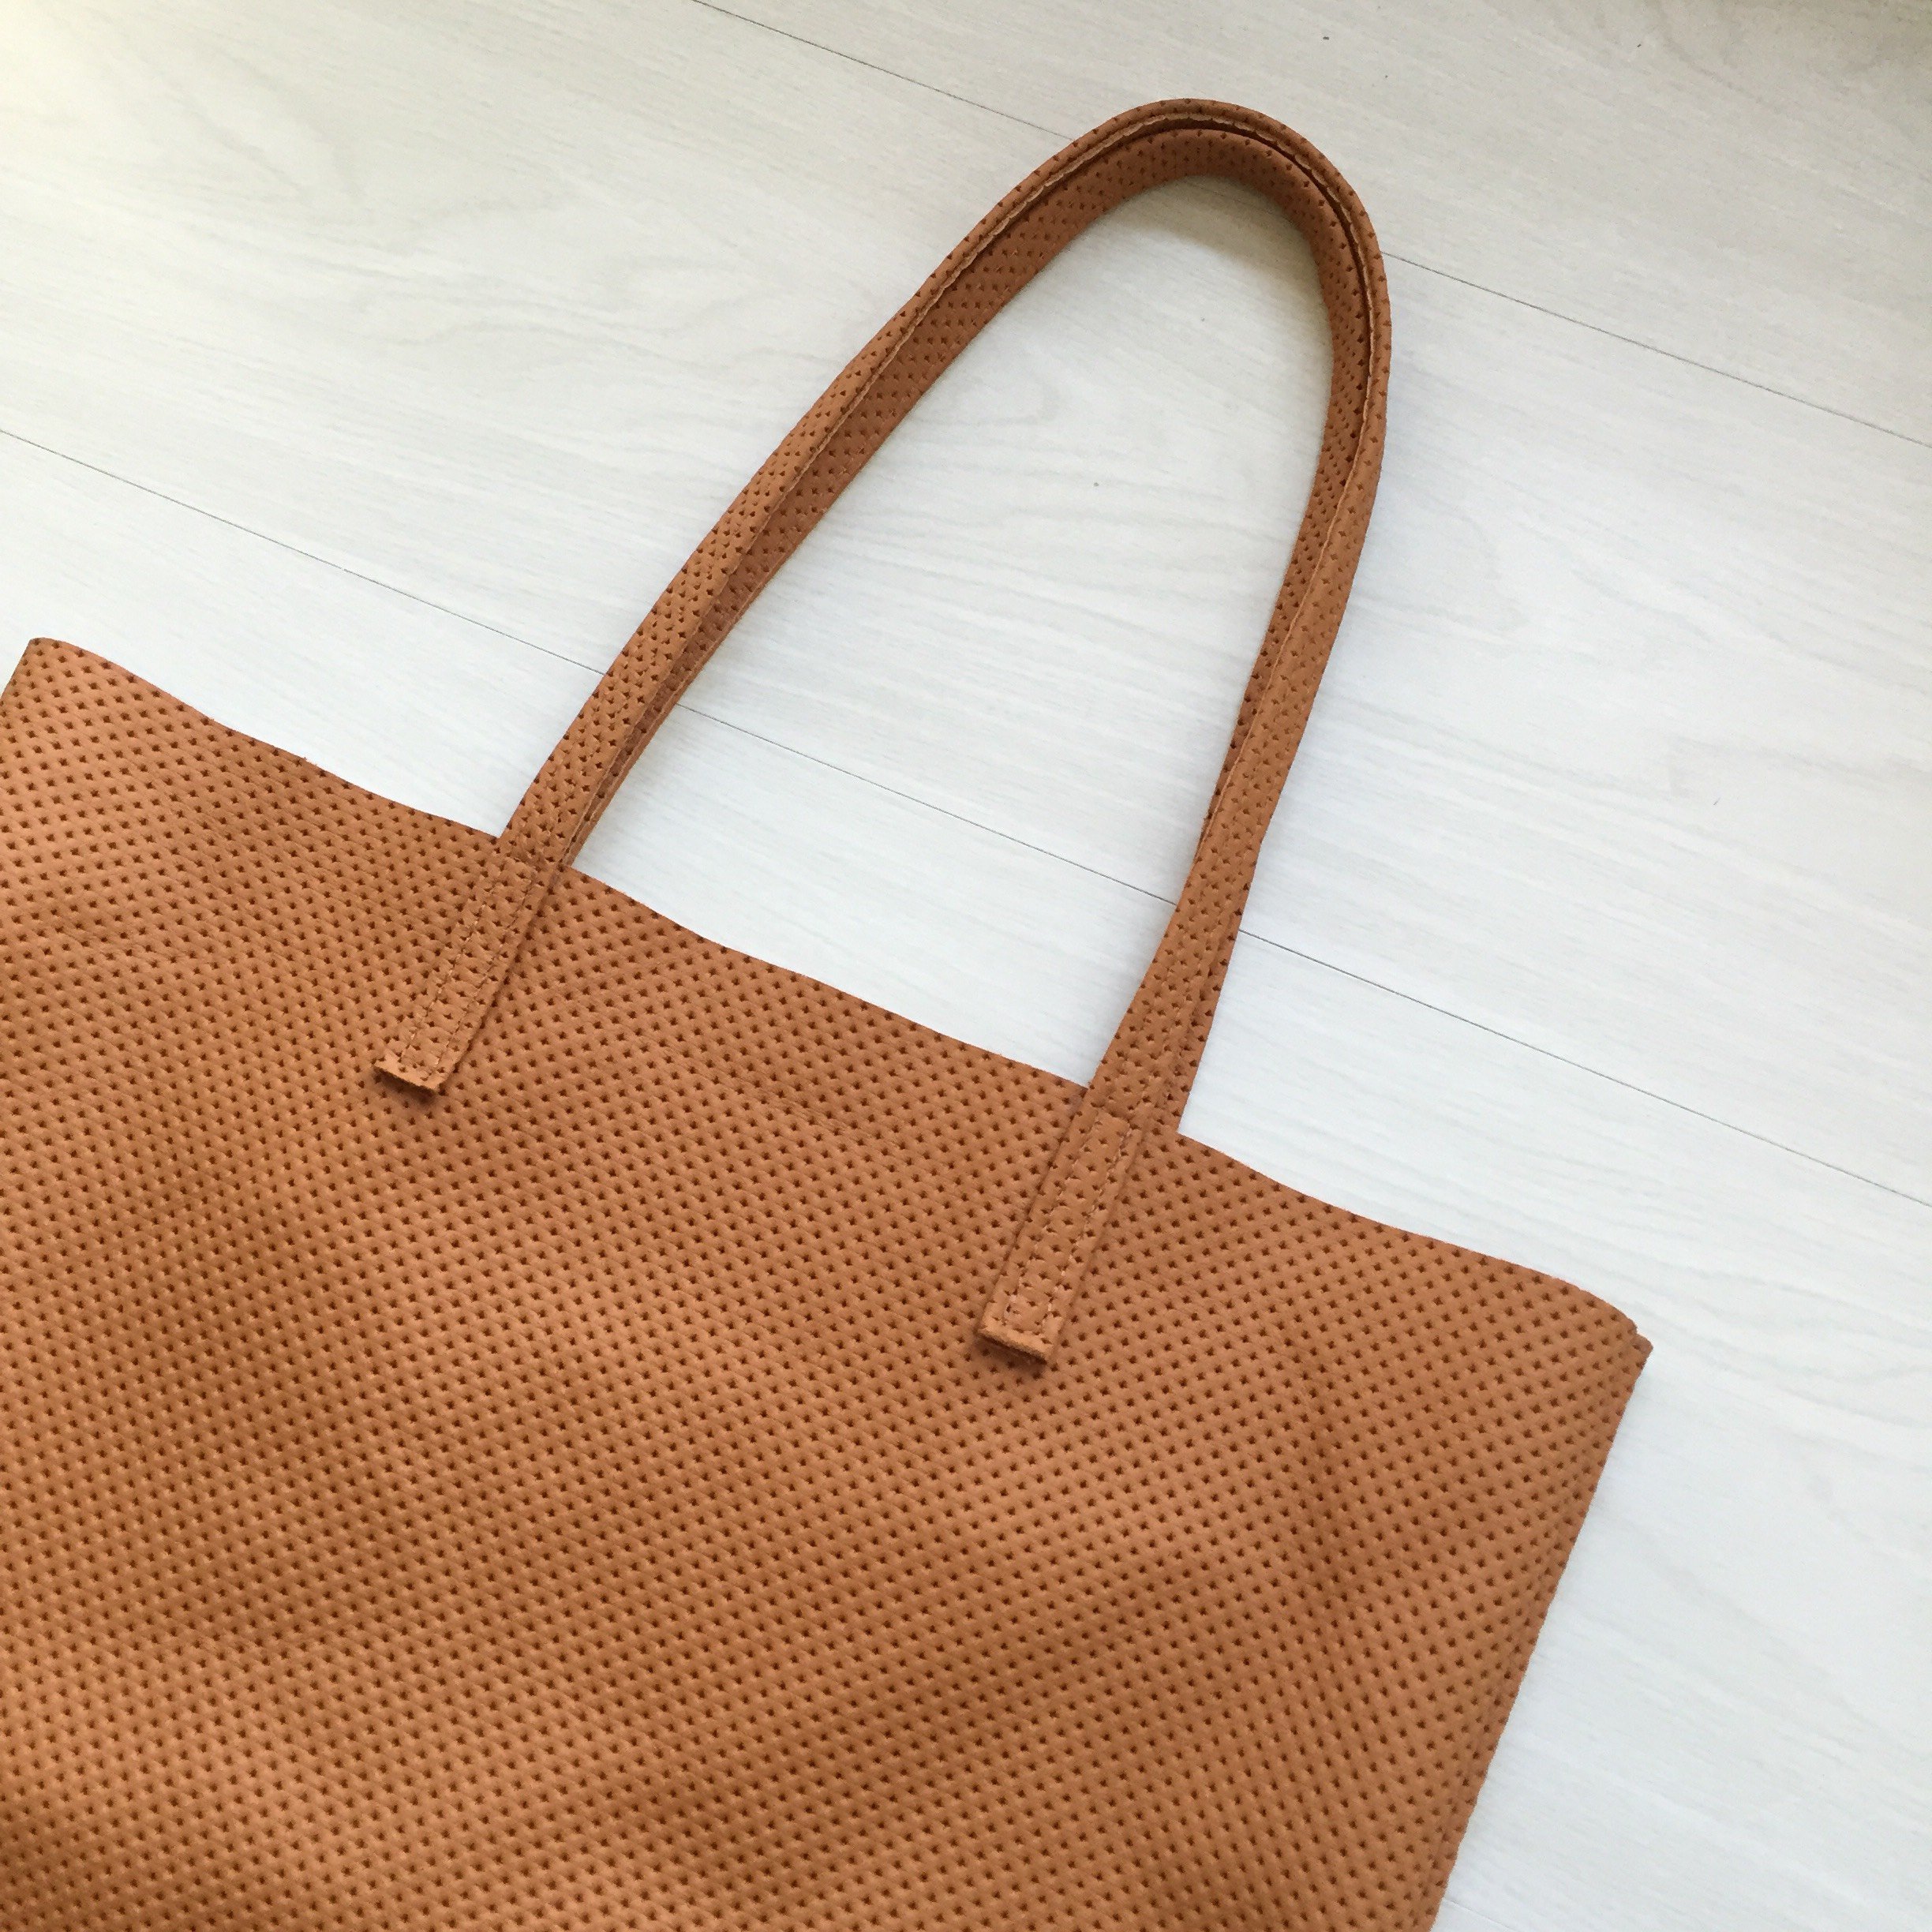 Raw Leather Tote Bag - Perforated Cognac